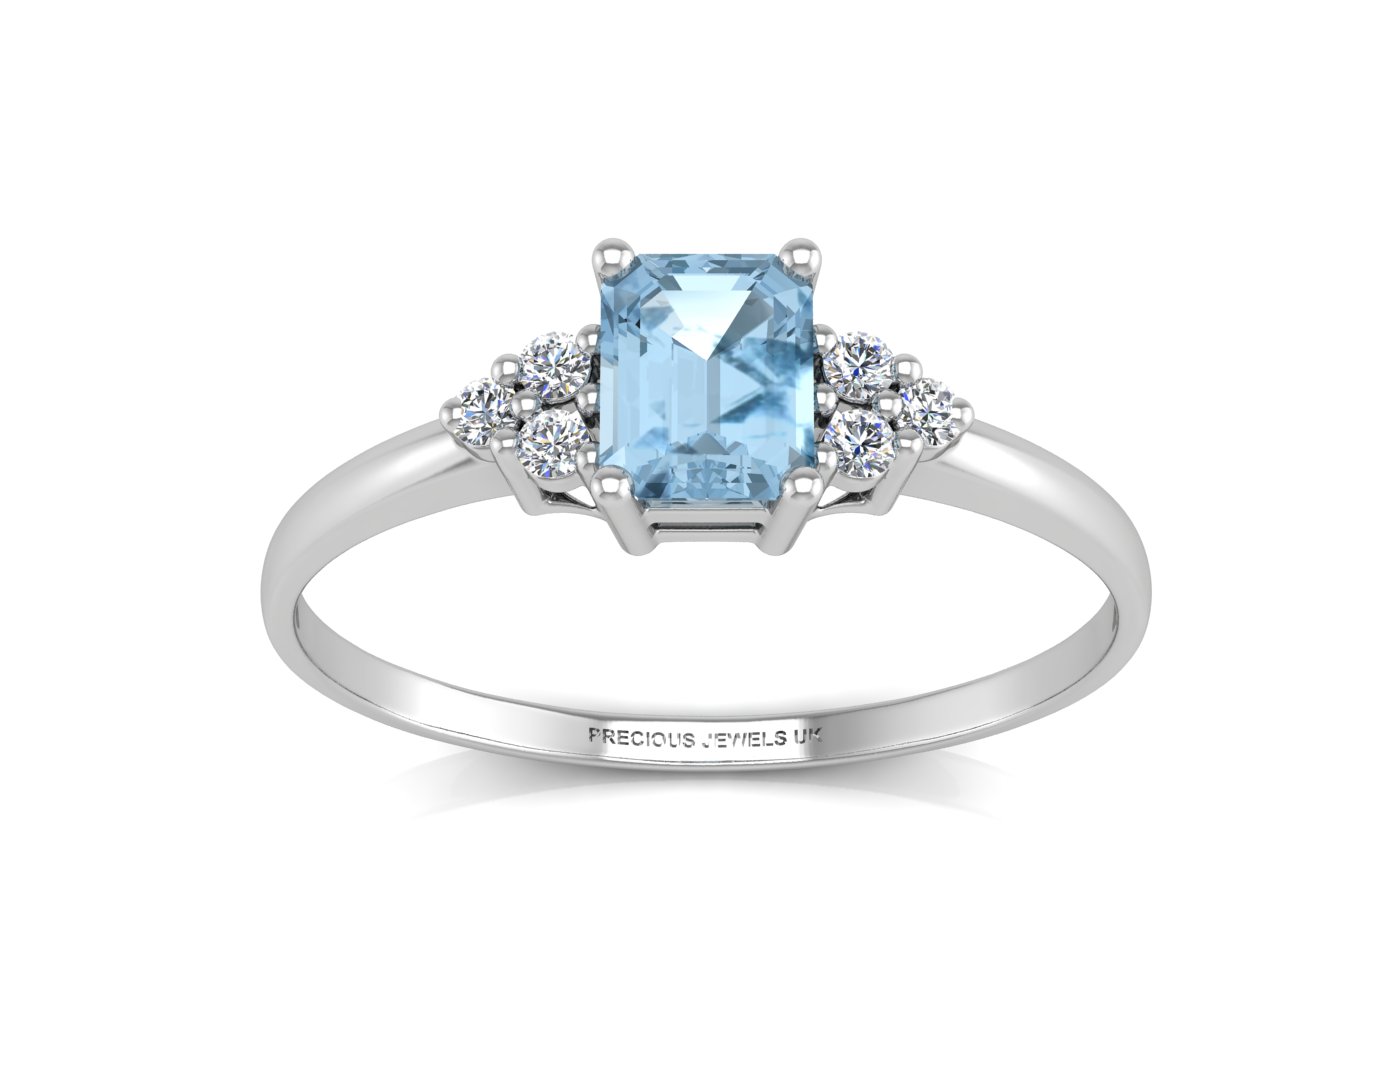 9ct White Gold Fancy Cluster Diamond Blue Topaz Ring (BT0.61) 0.06 Carats - Image 3 of 5